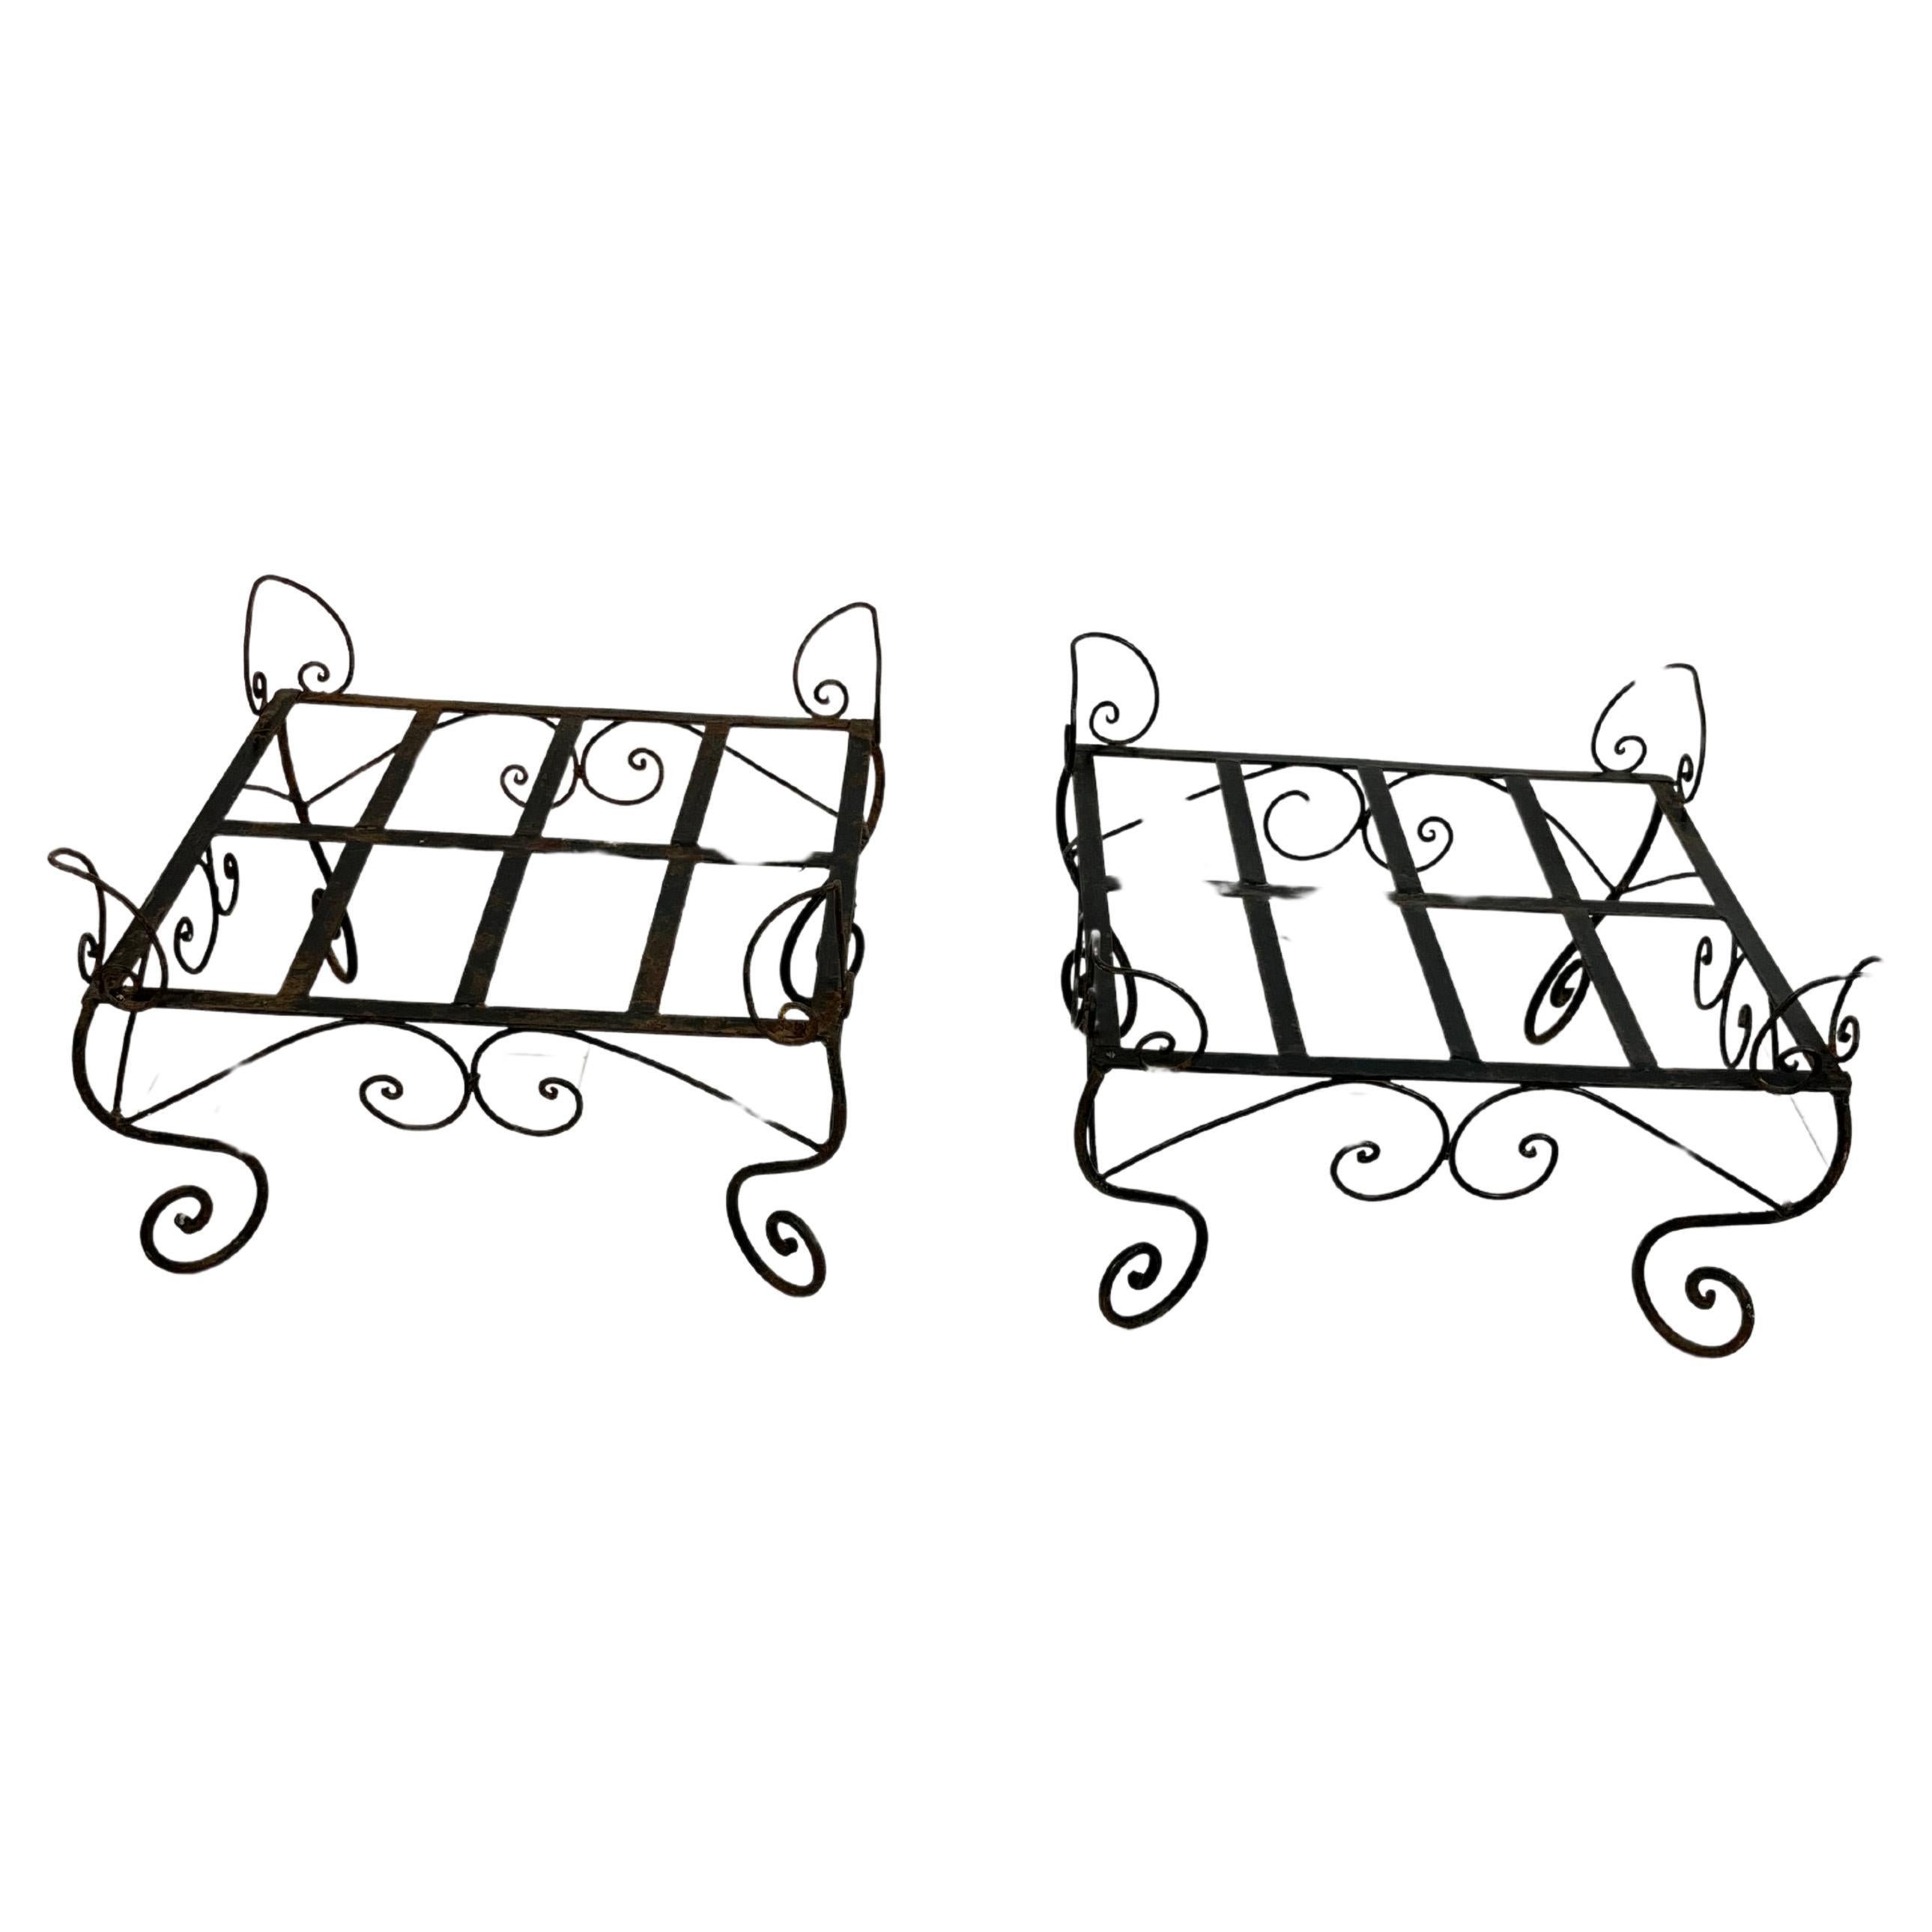 Pair of wrought iron vase holders, Italy, 1970s
Found in a villa in the Sicilian hinterland. Good condition. Upon request I can deliver them repainted with enamel.